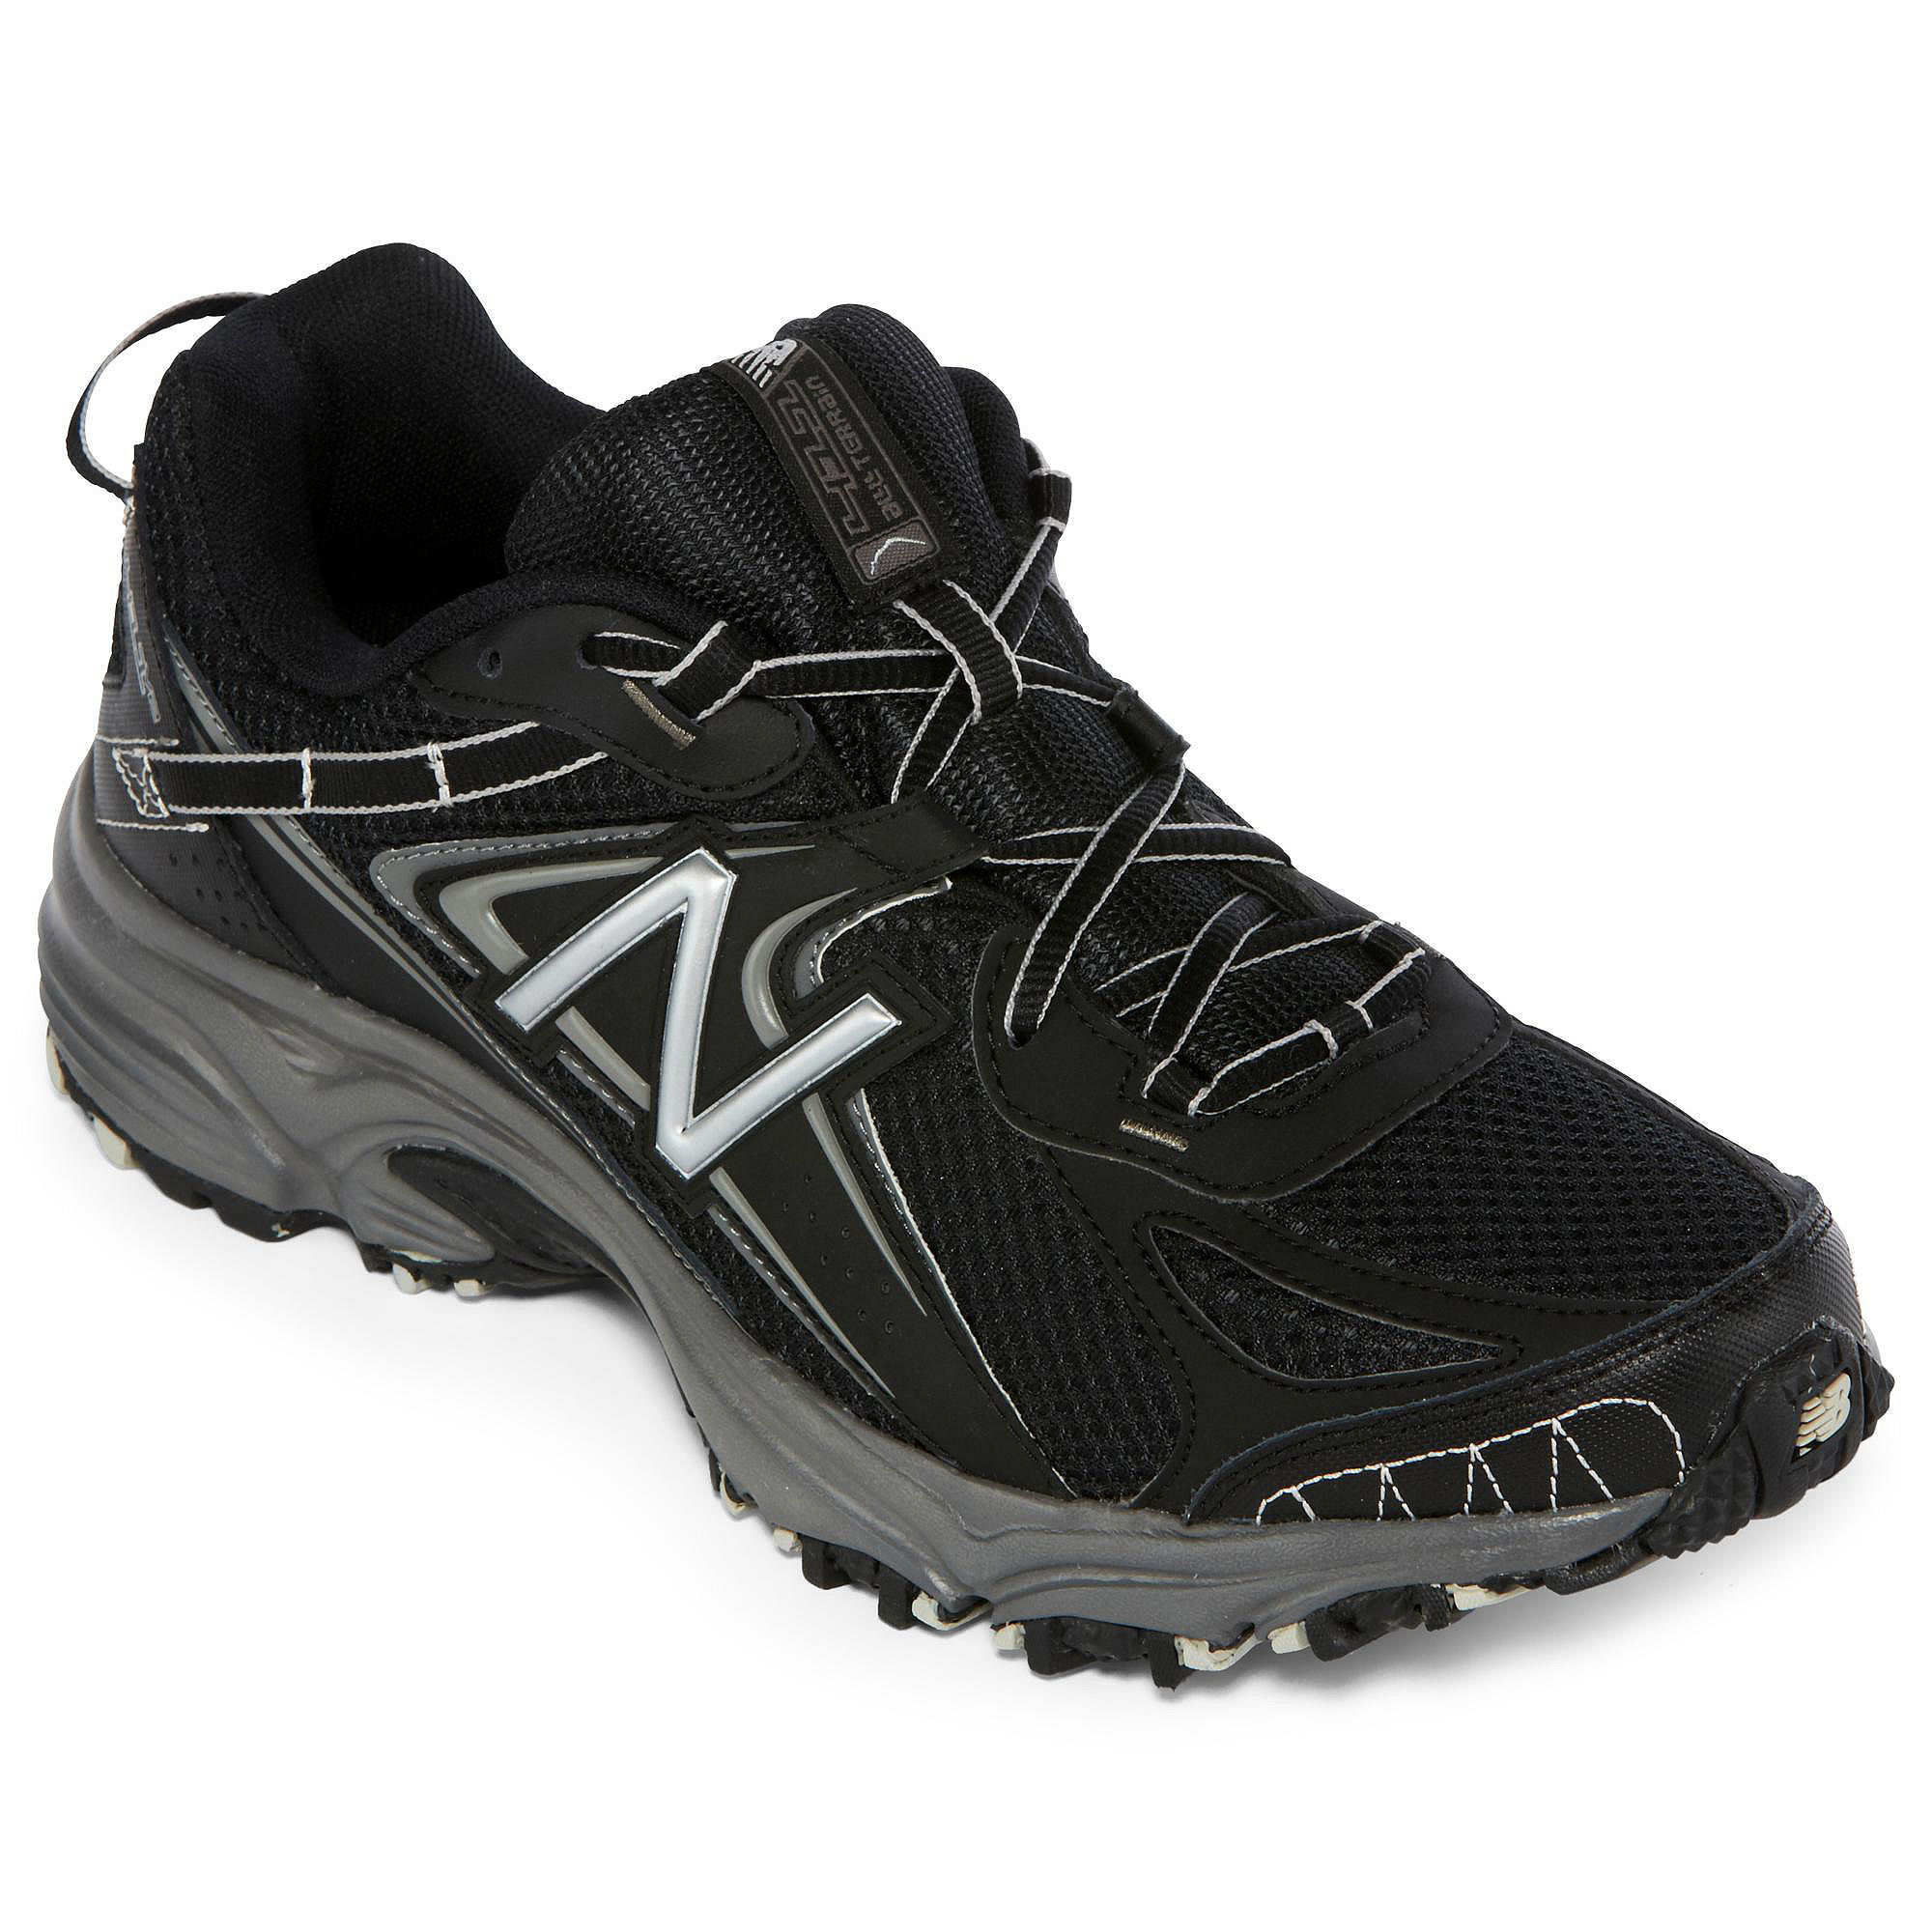 UPC 886863600058 product image for New Balance 411 Mens Trail Running Shoes | upcitemdb.com